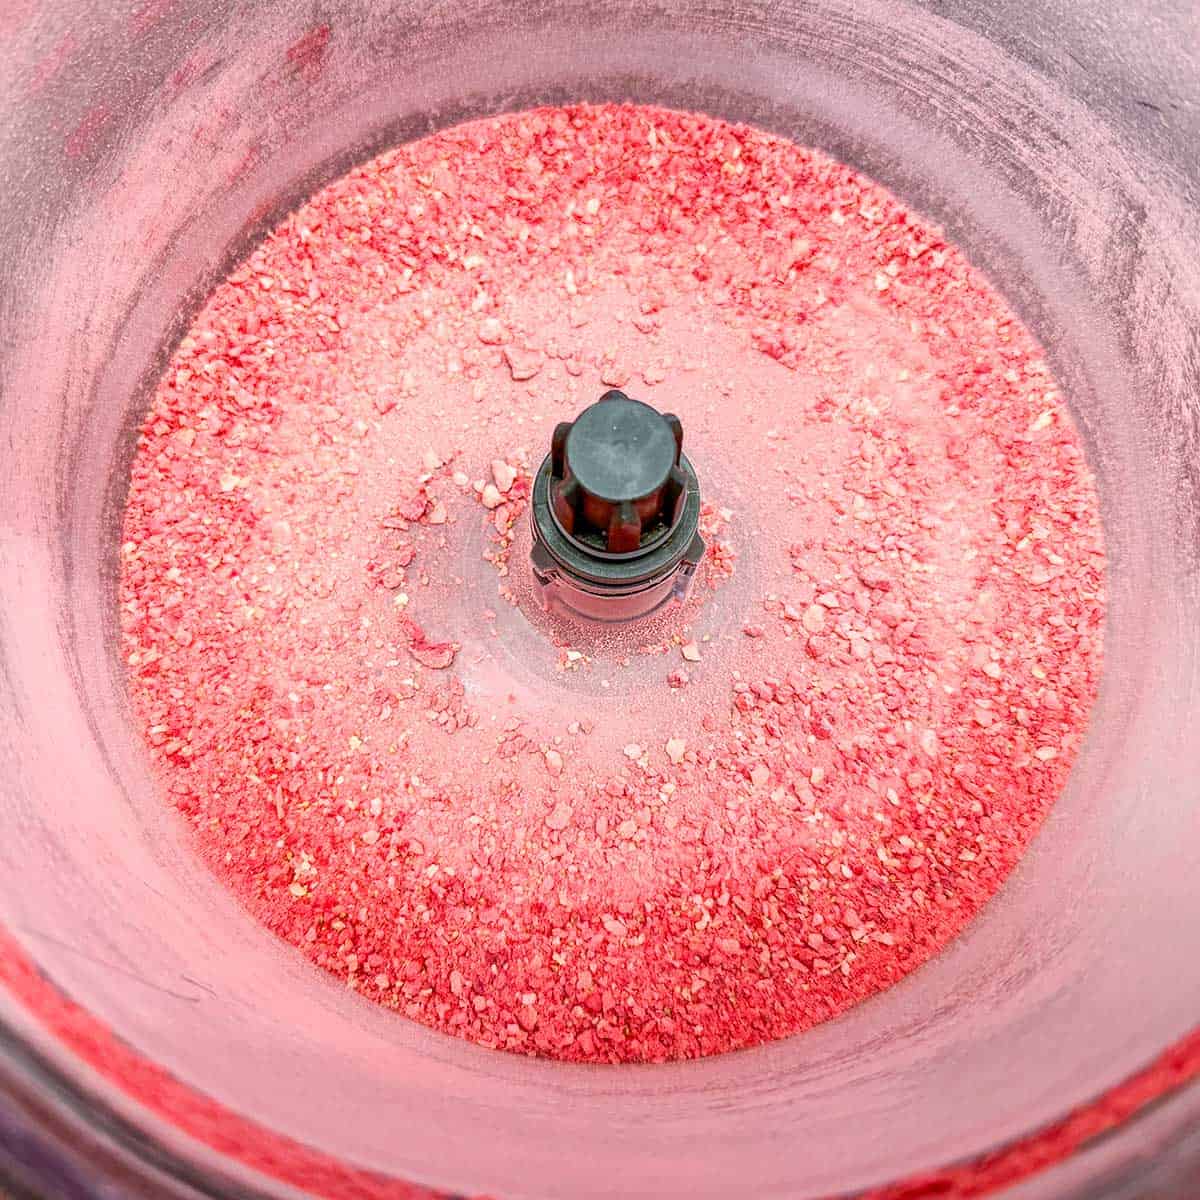 Using a food processor to crush freeze-dried strawberries to dust.